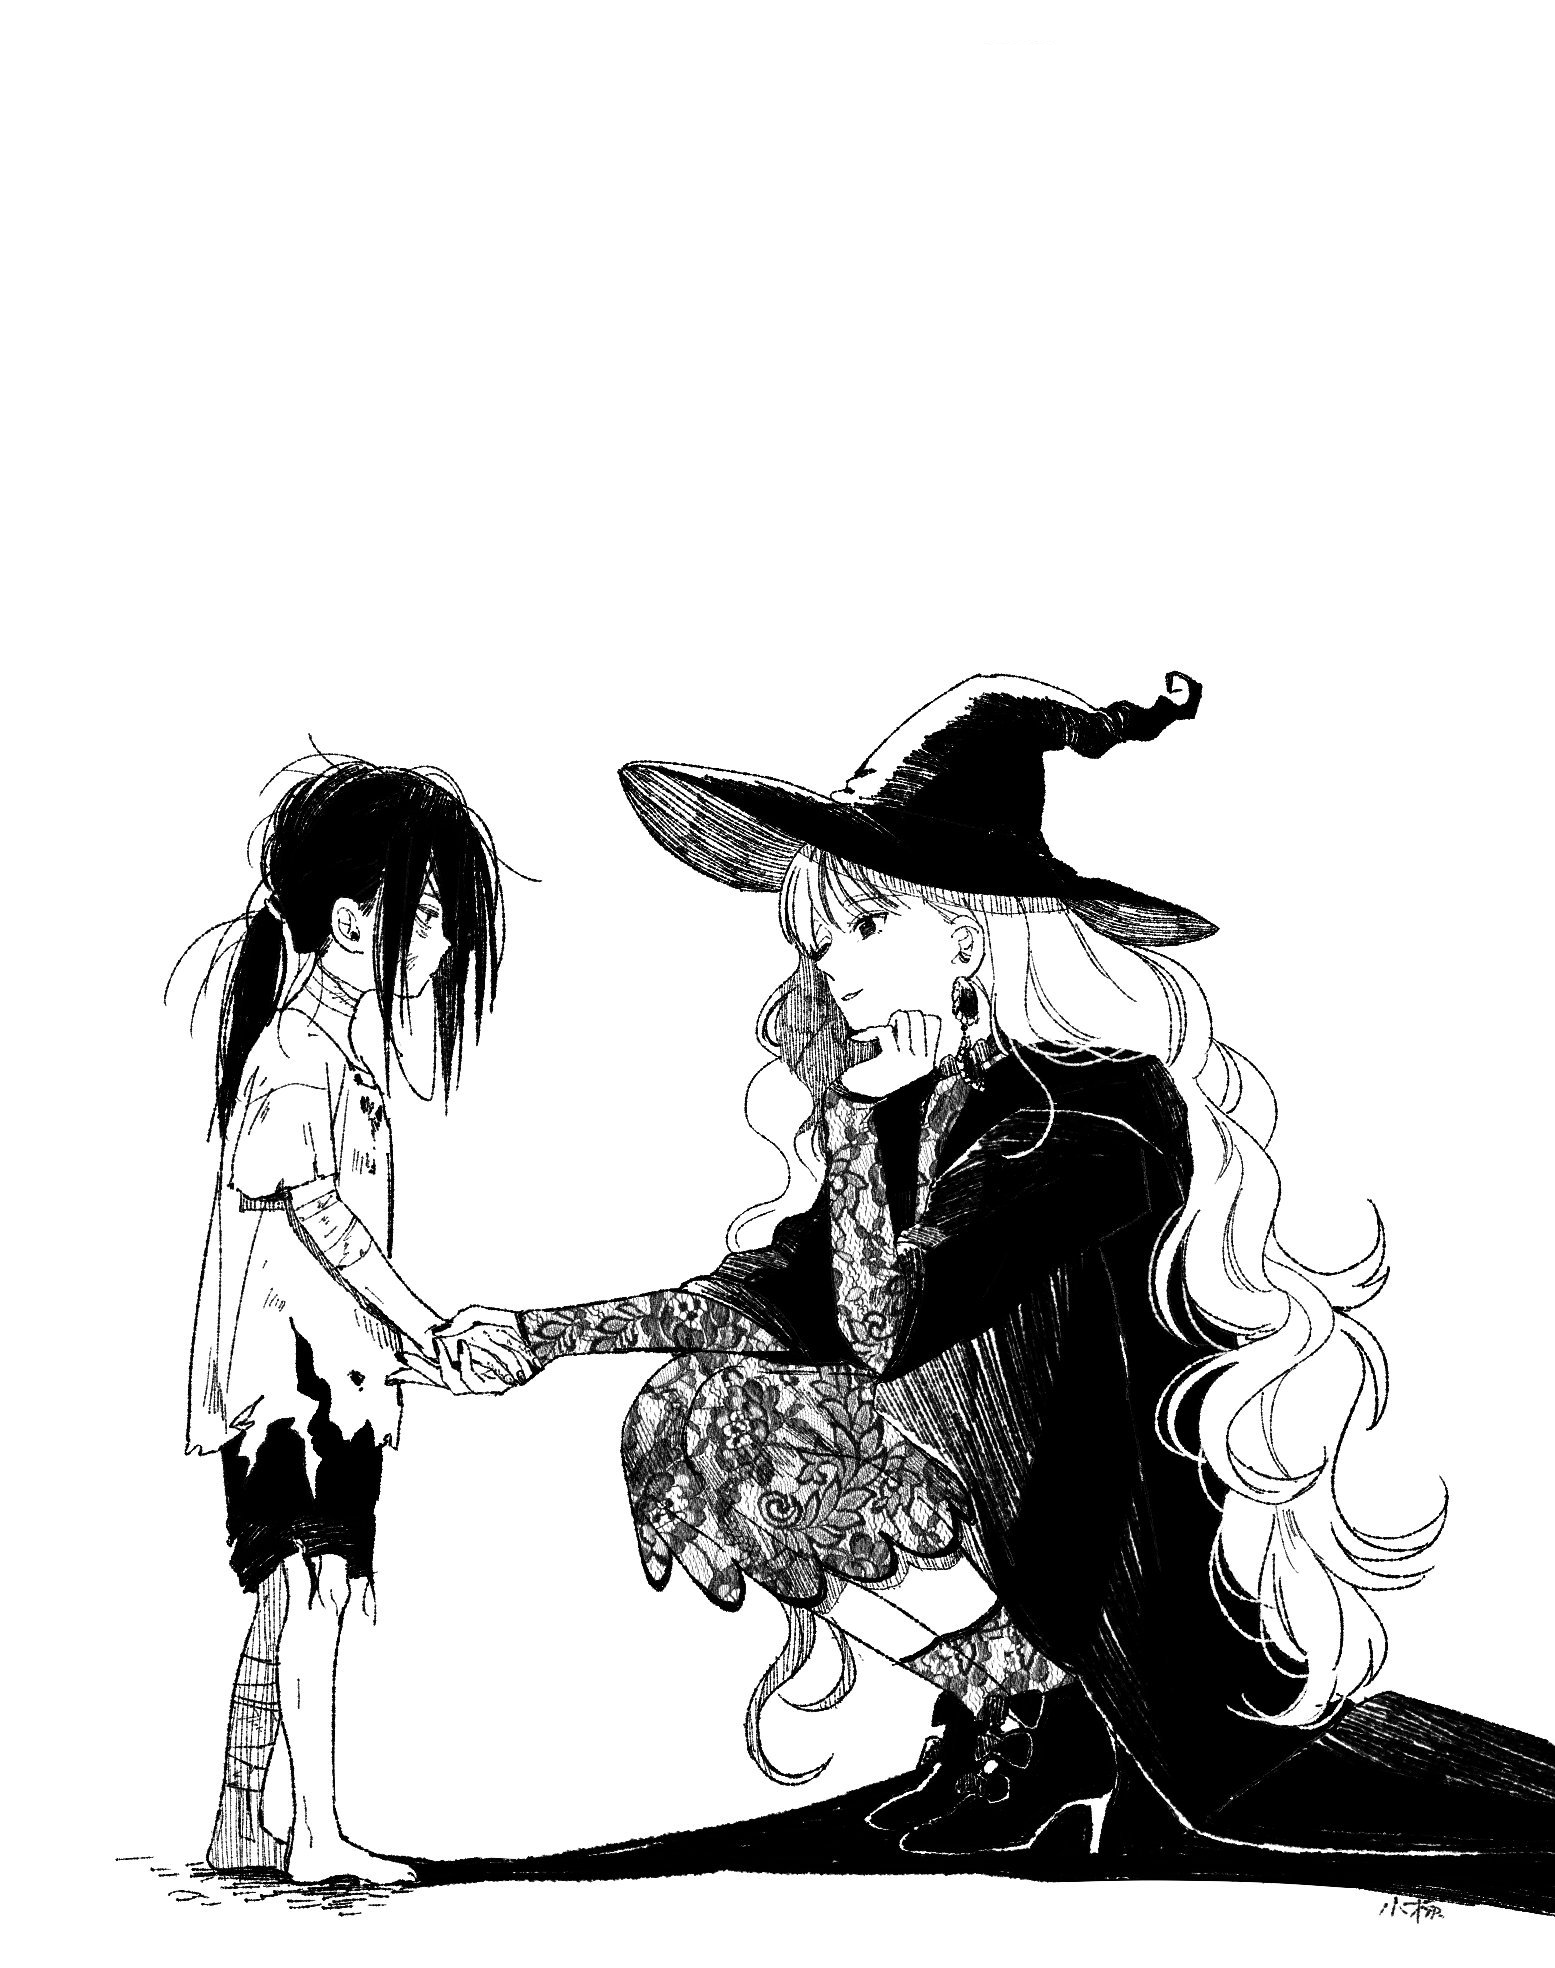 Let's Meet at the Witches' Gathering manga